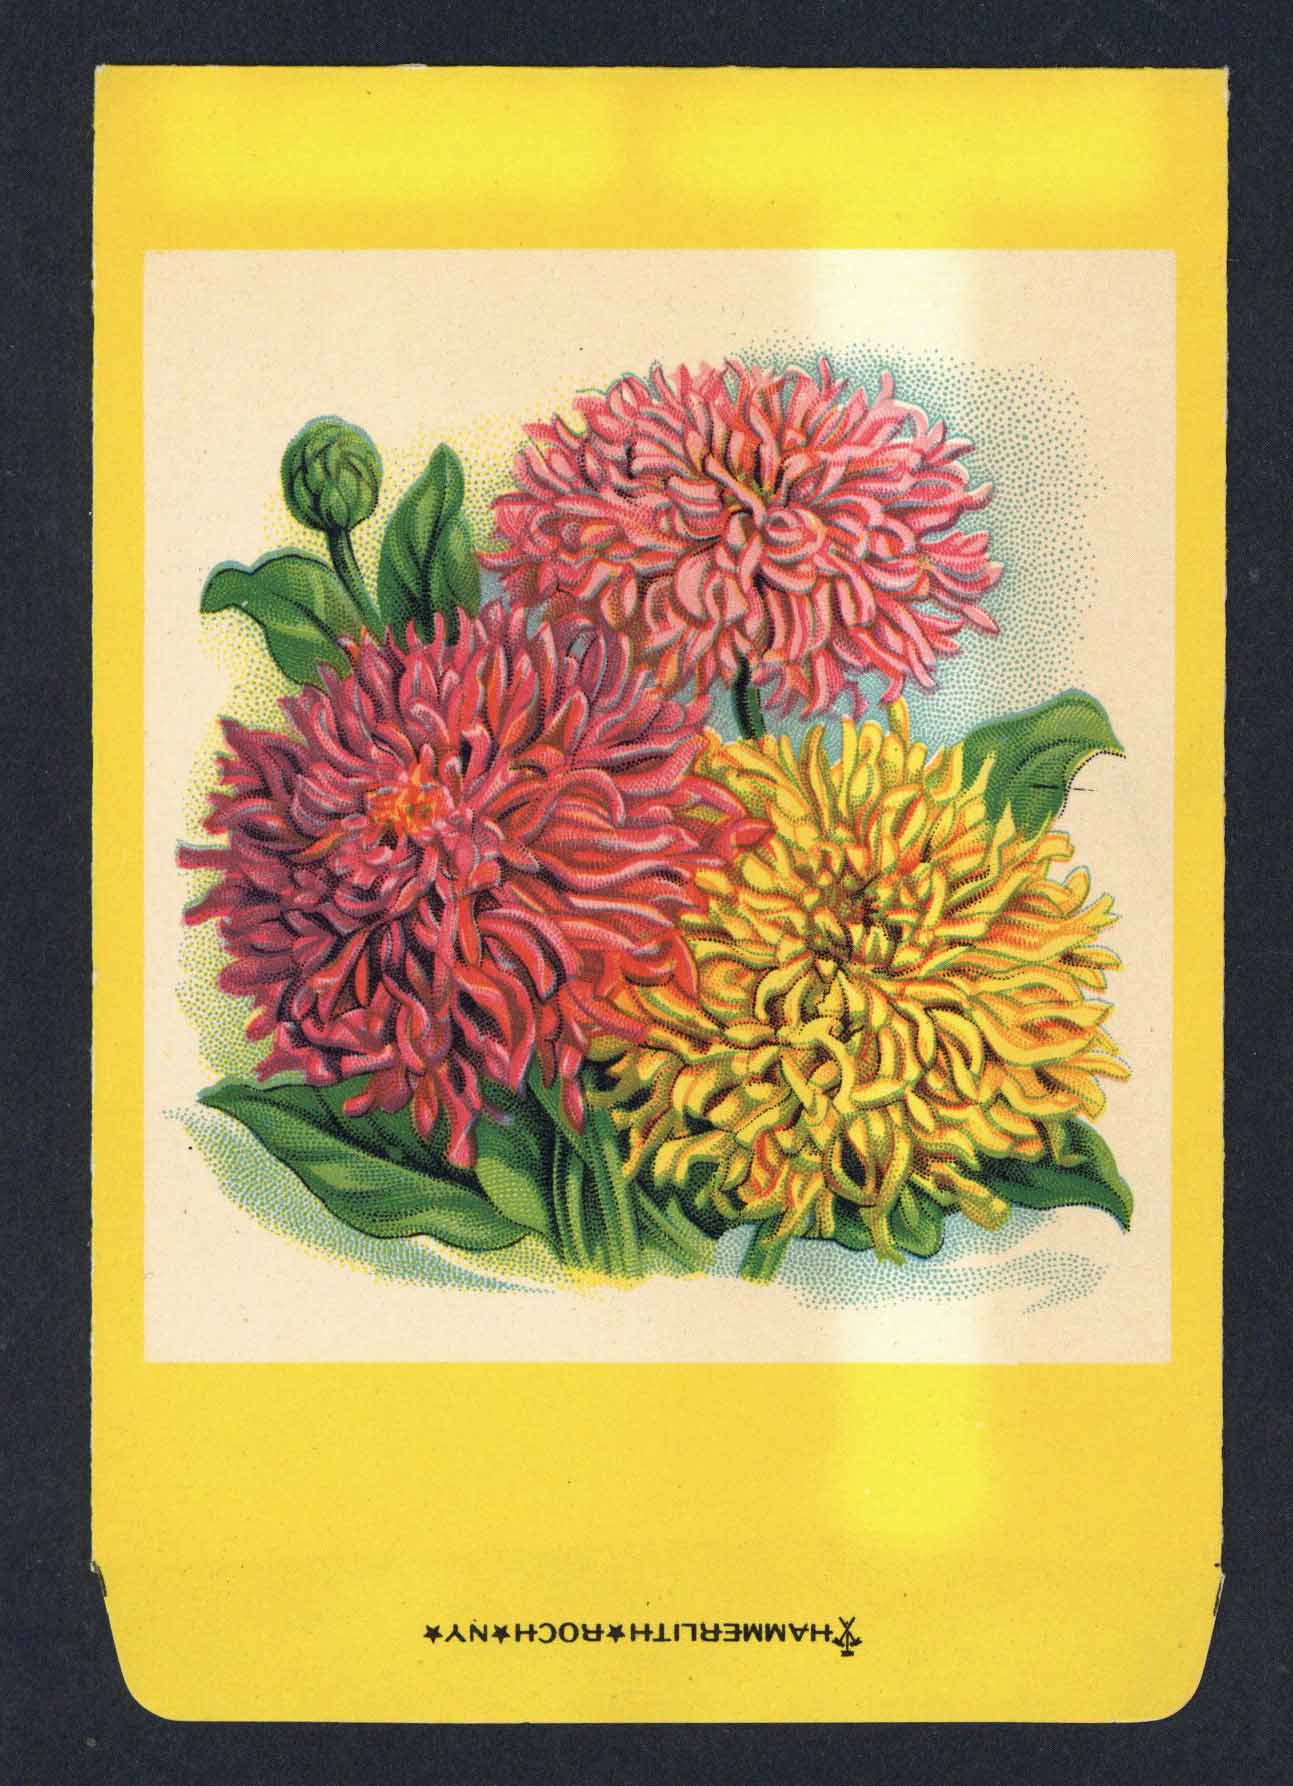 Zinnia Antique Stock Seed Packet, Hammerlith